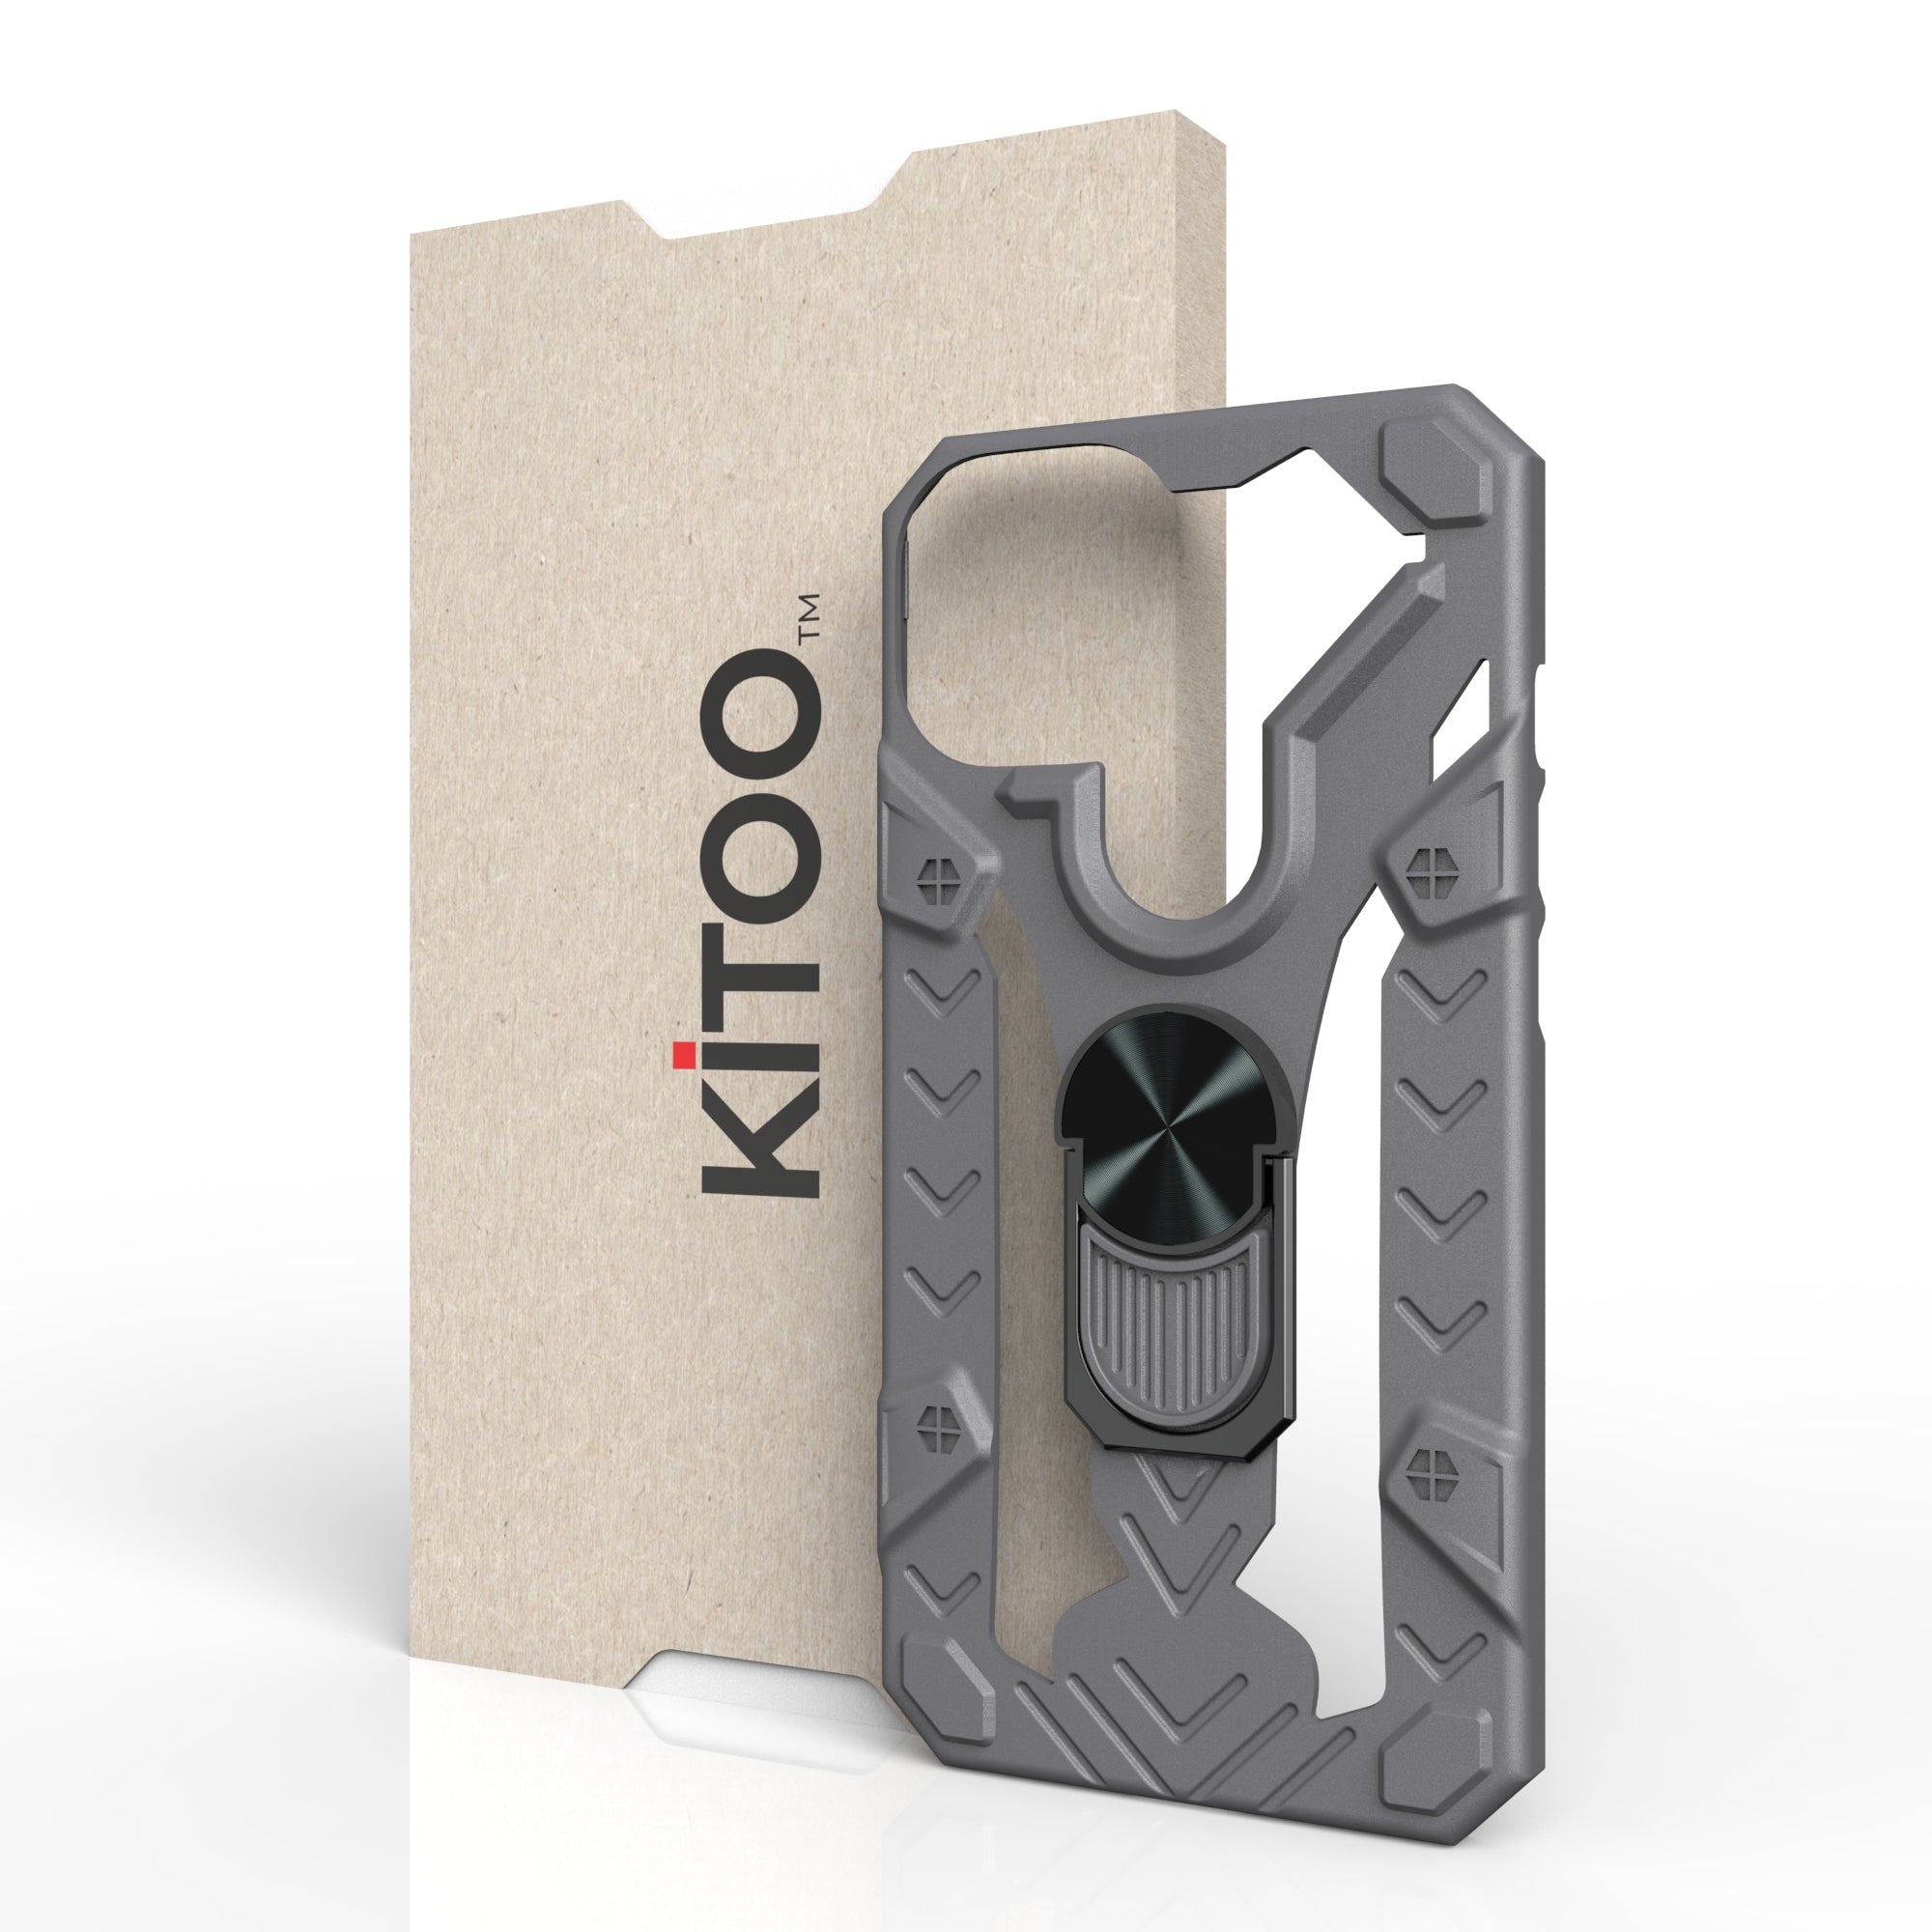 Kitoo Ring Panel Designed for iPhone 13 case (Spare Part only) - Grey